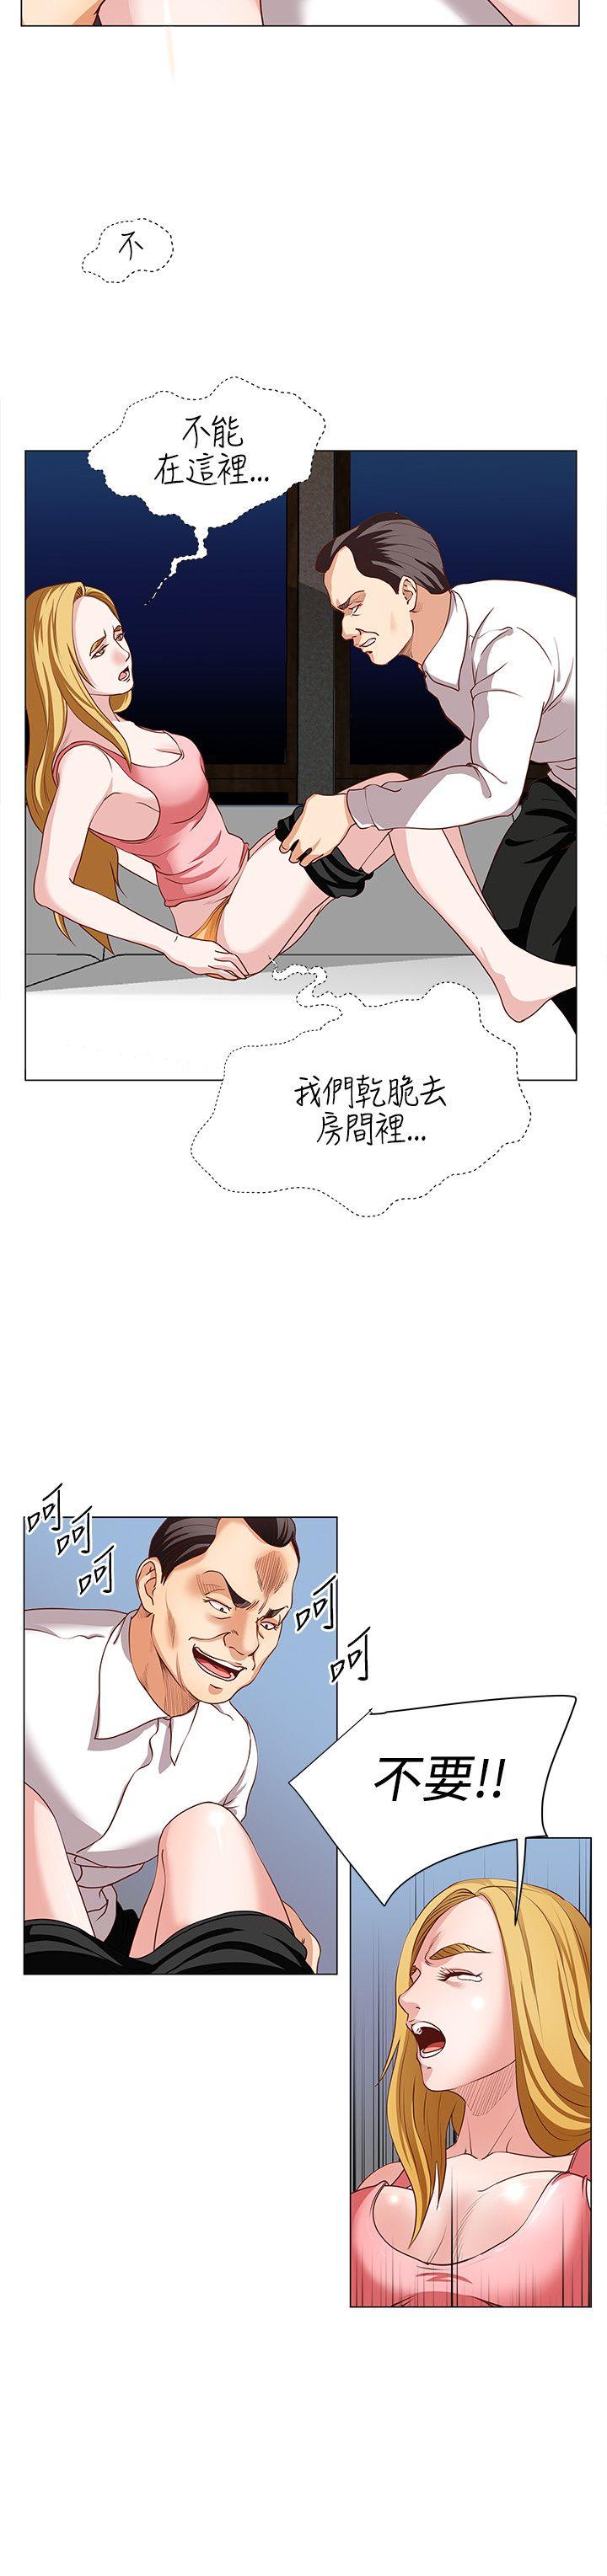 《OFFICE TROUBLE》漫画 第14话